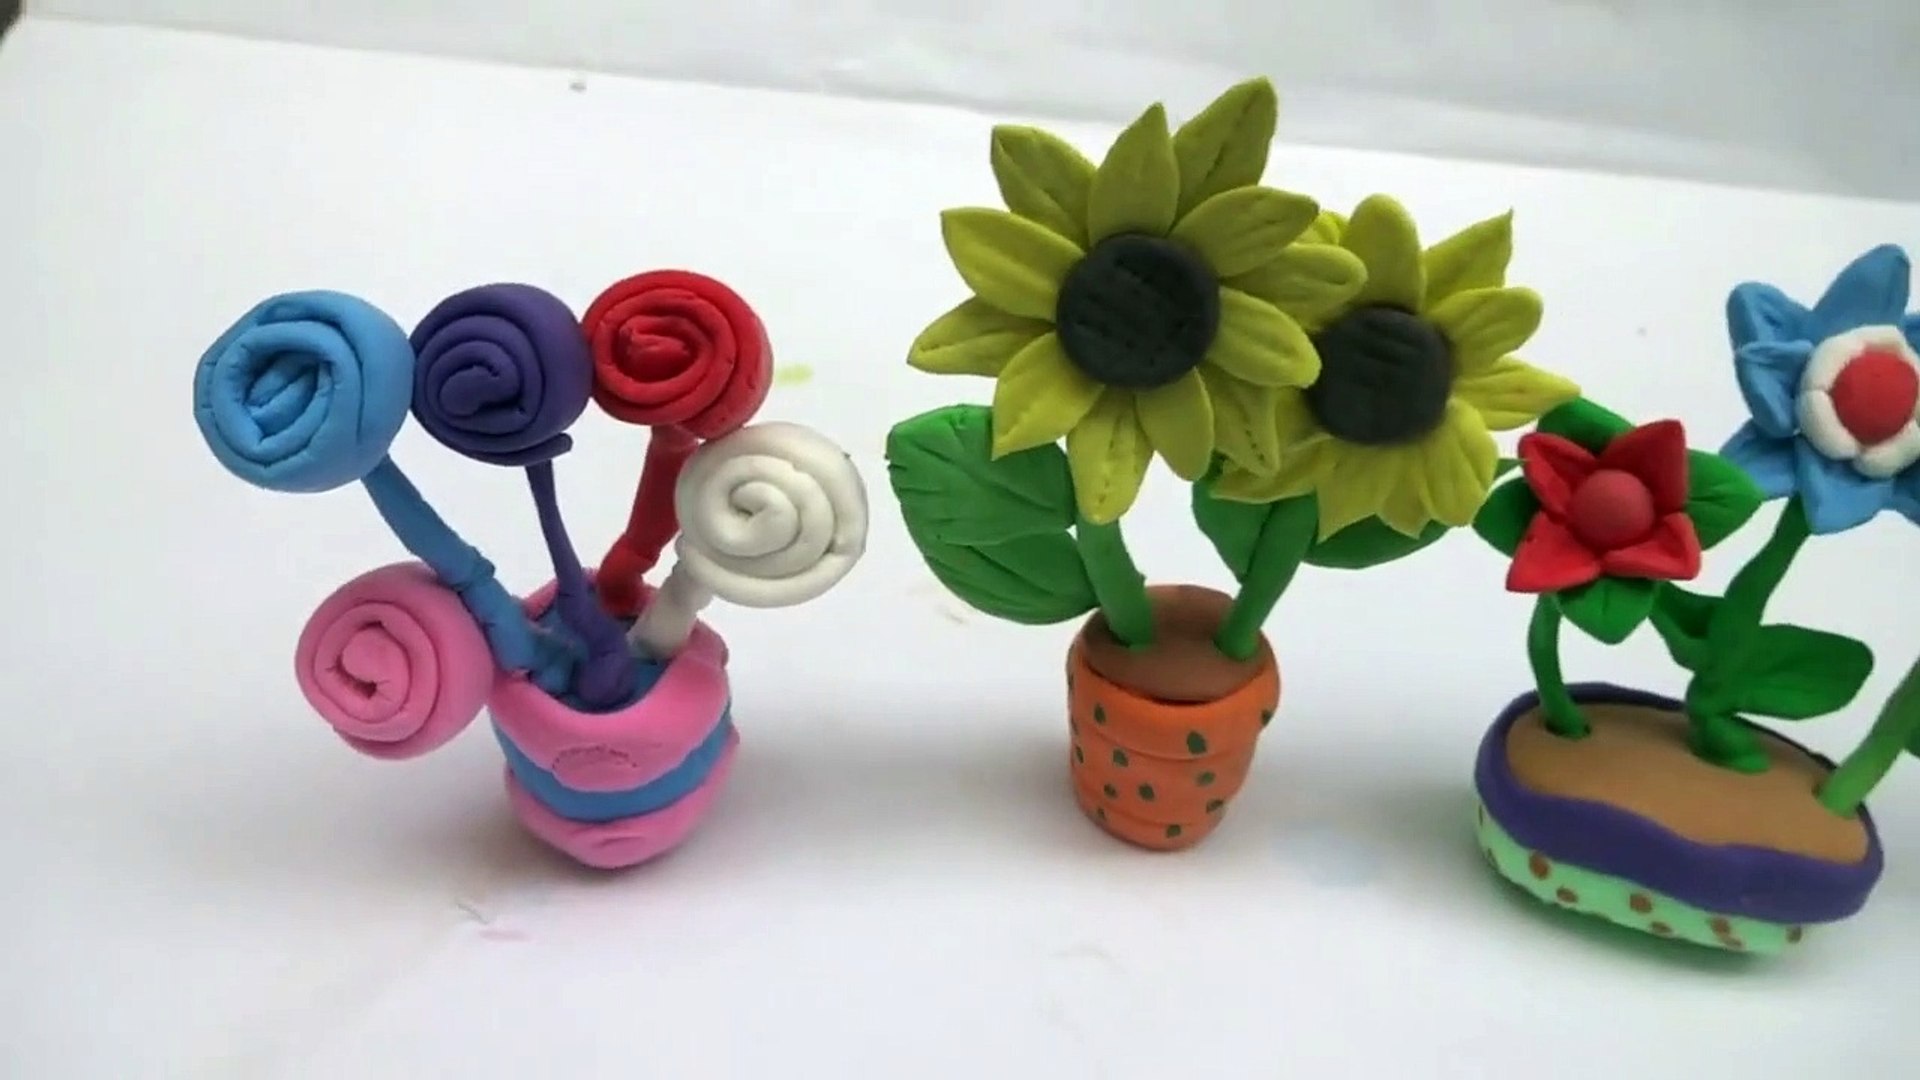 Miniature 'flowers in a watering can' tutorial using polymer clay